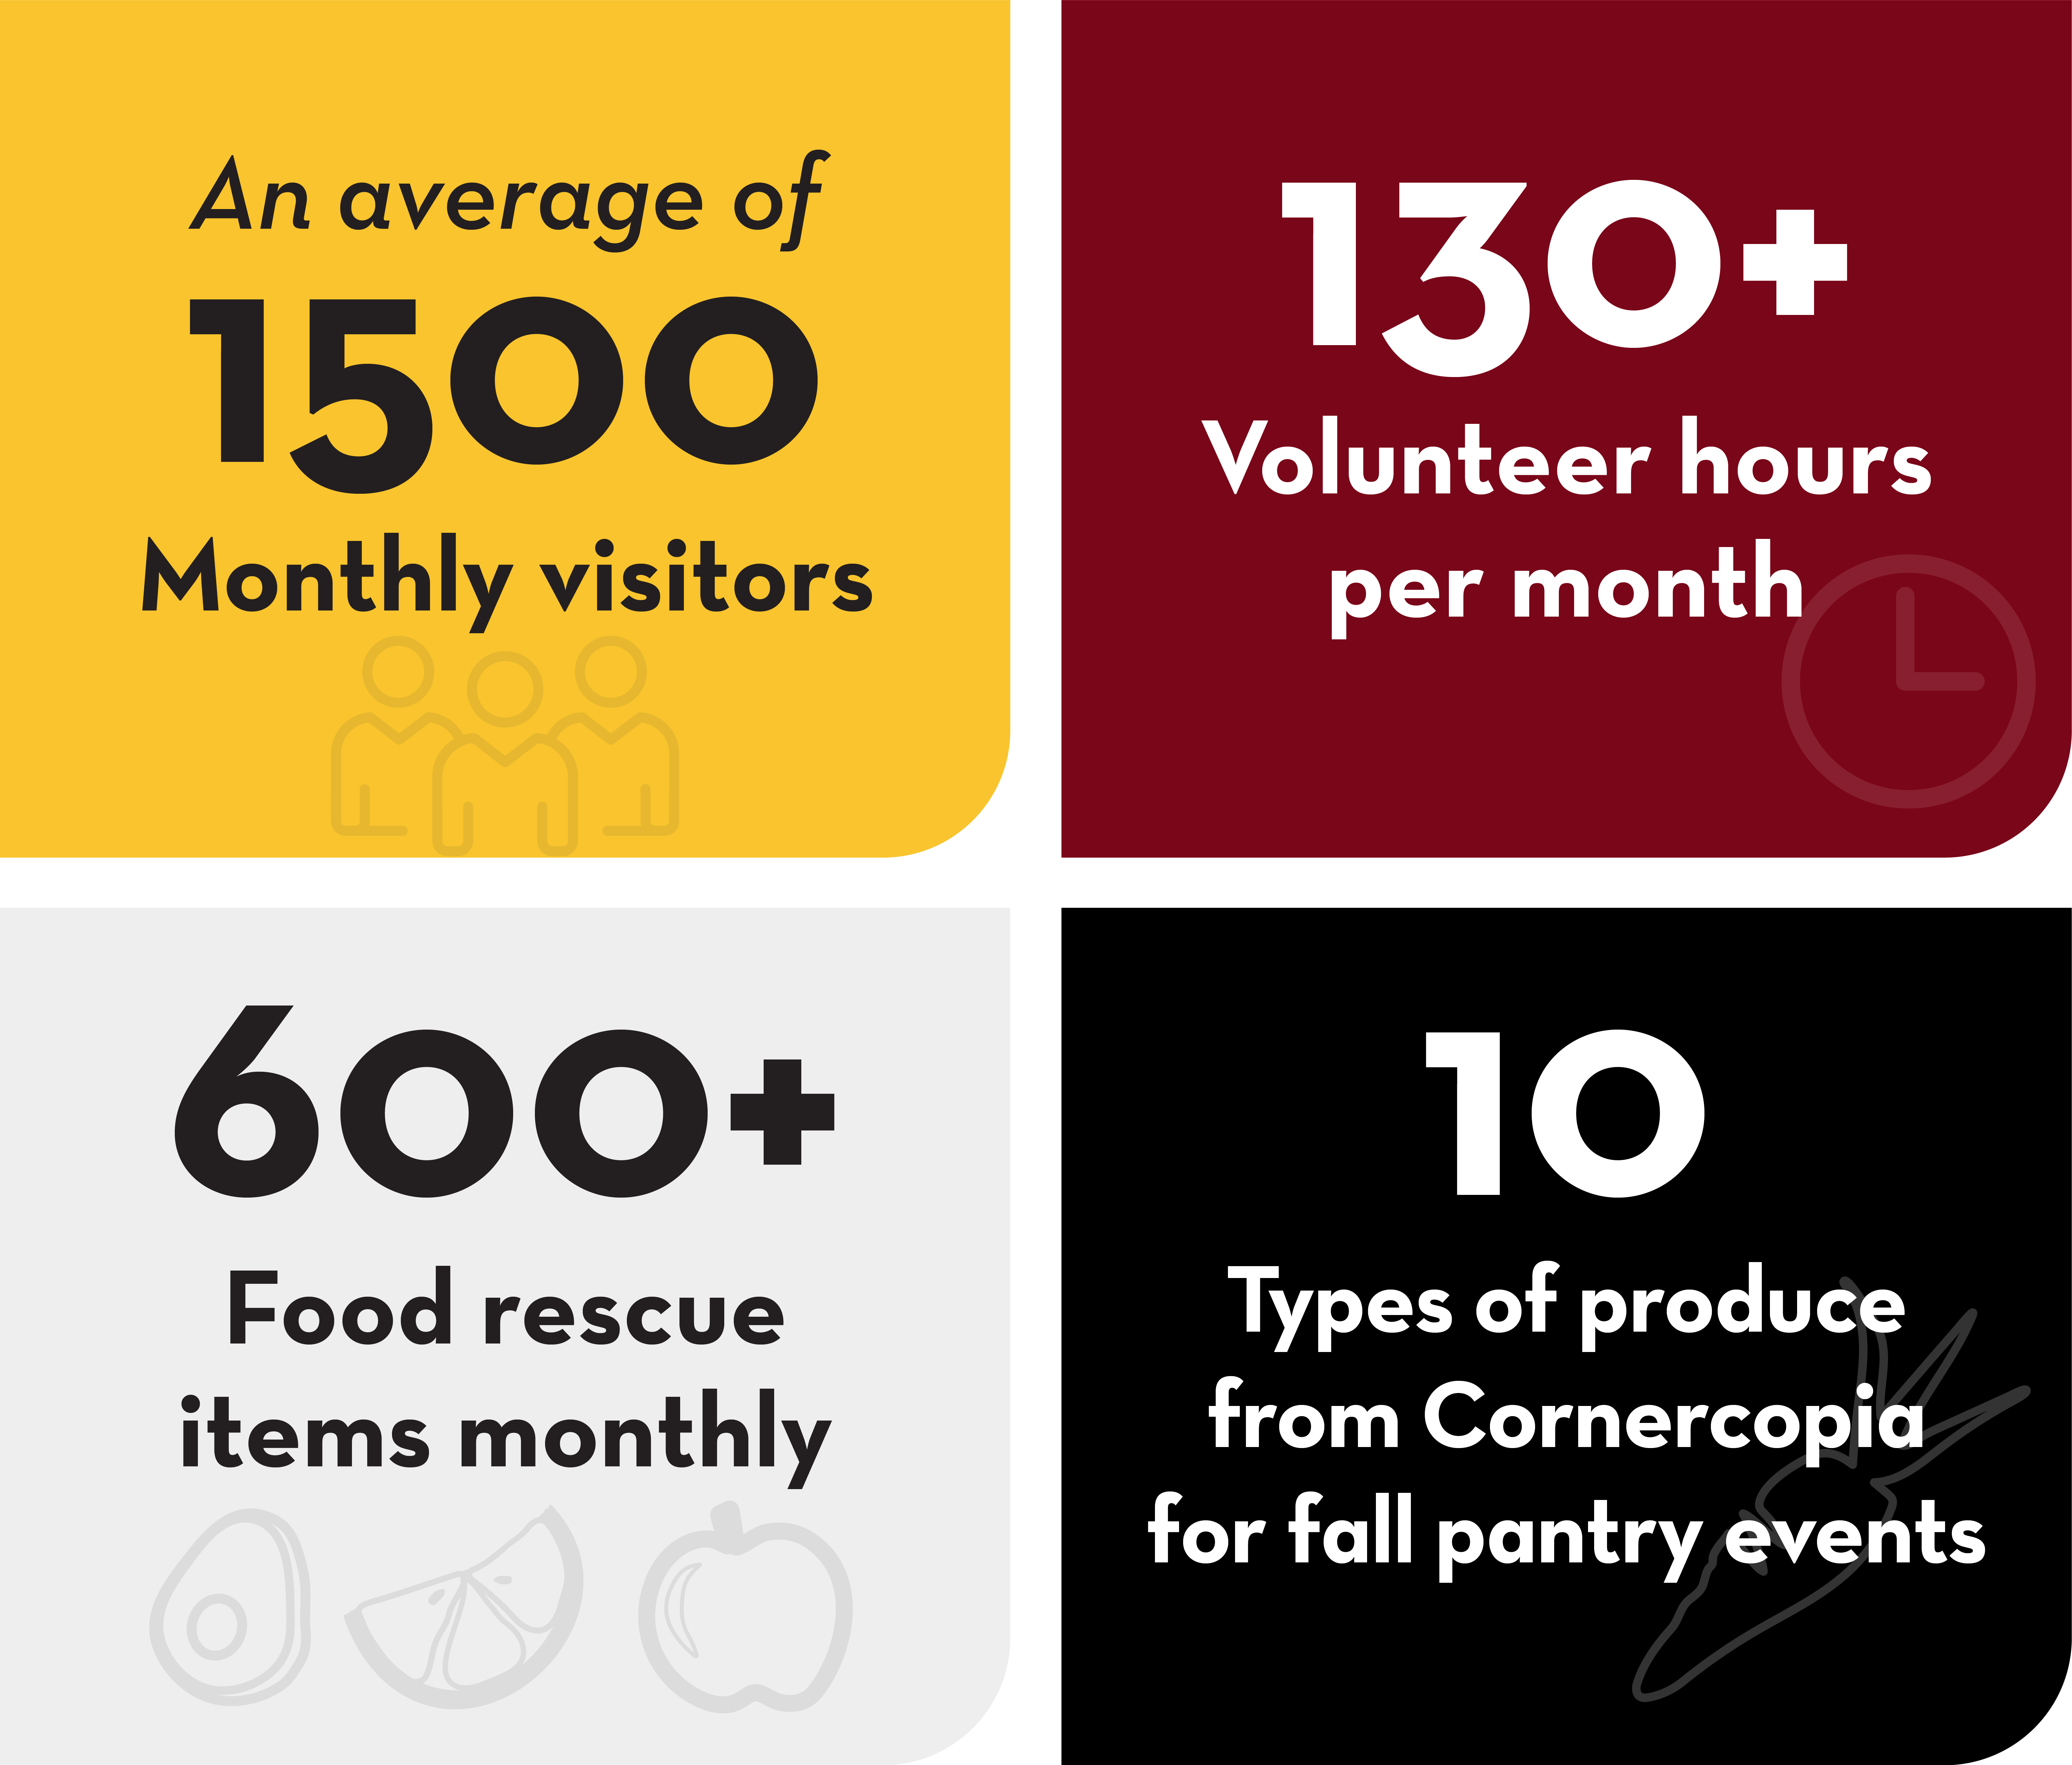 An average of 1500 monthly visitors, 130+ Volunteer hours per month, 600+ Food rescue items monthly, 10 Types of produce from Cornercopia for fall pantry events